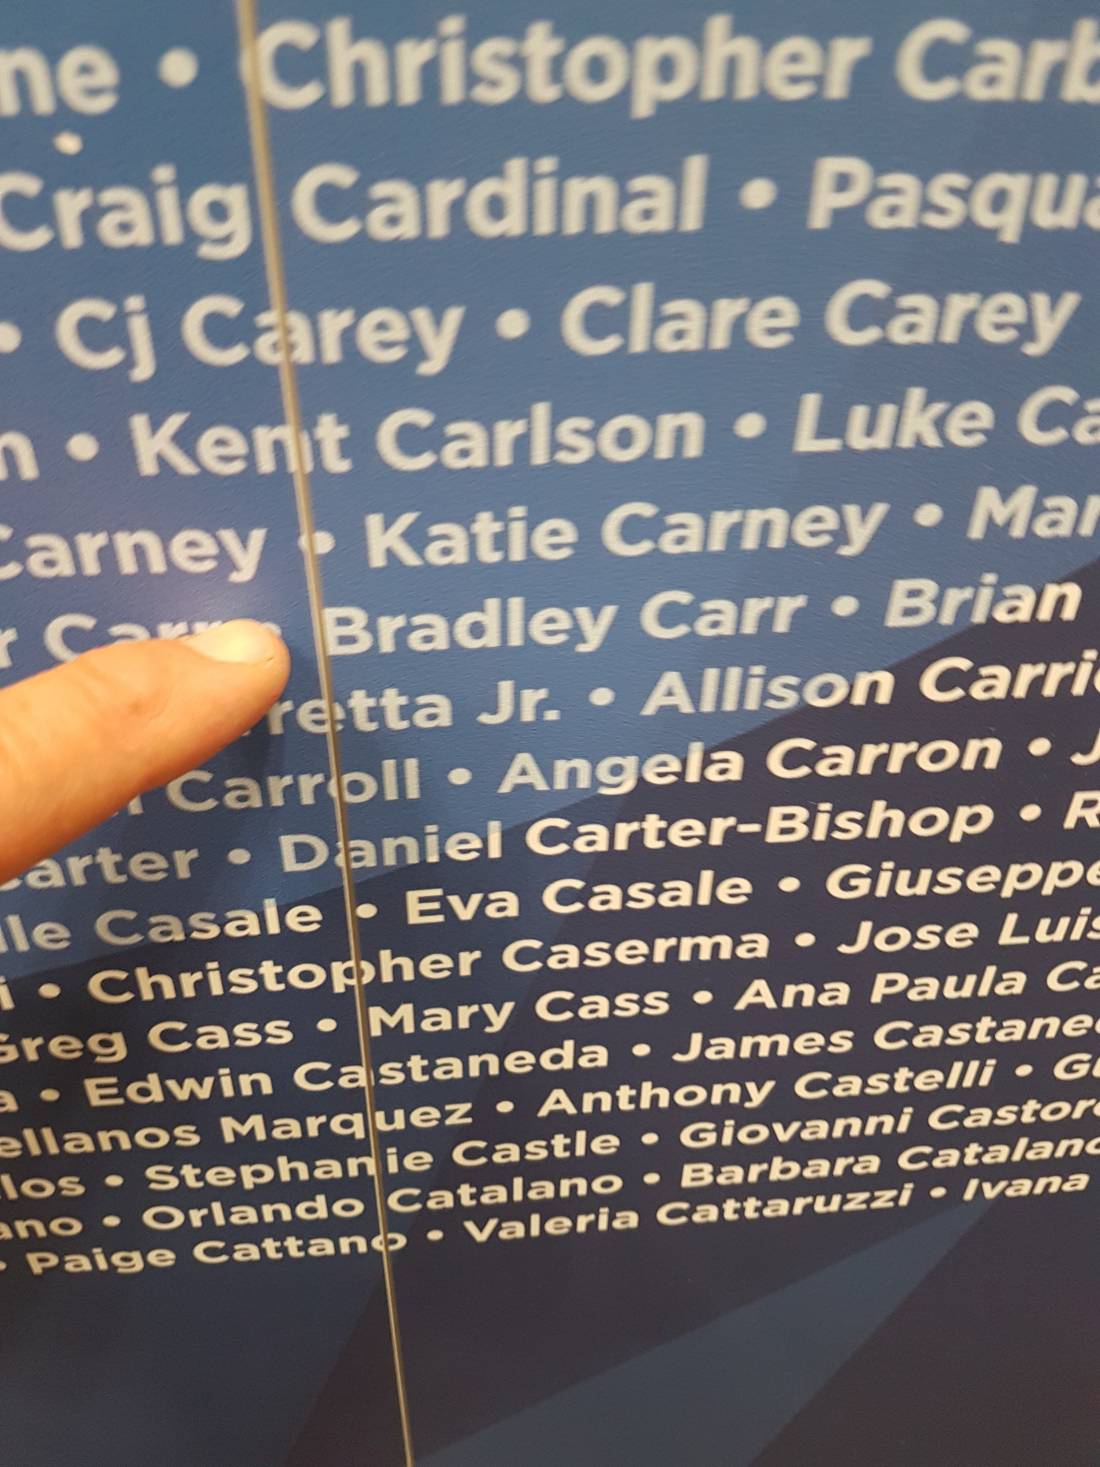 I found my name on the list! Very cool.